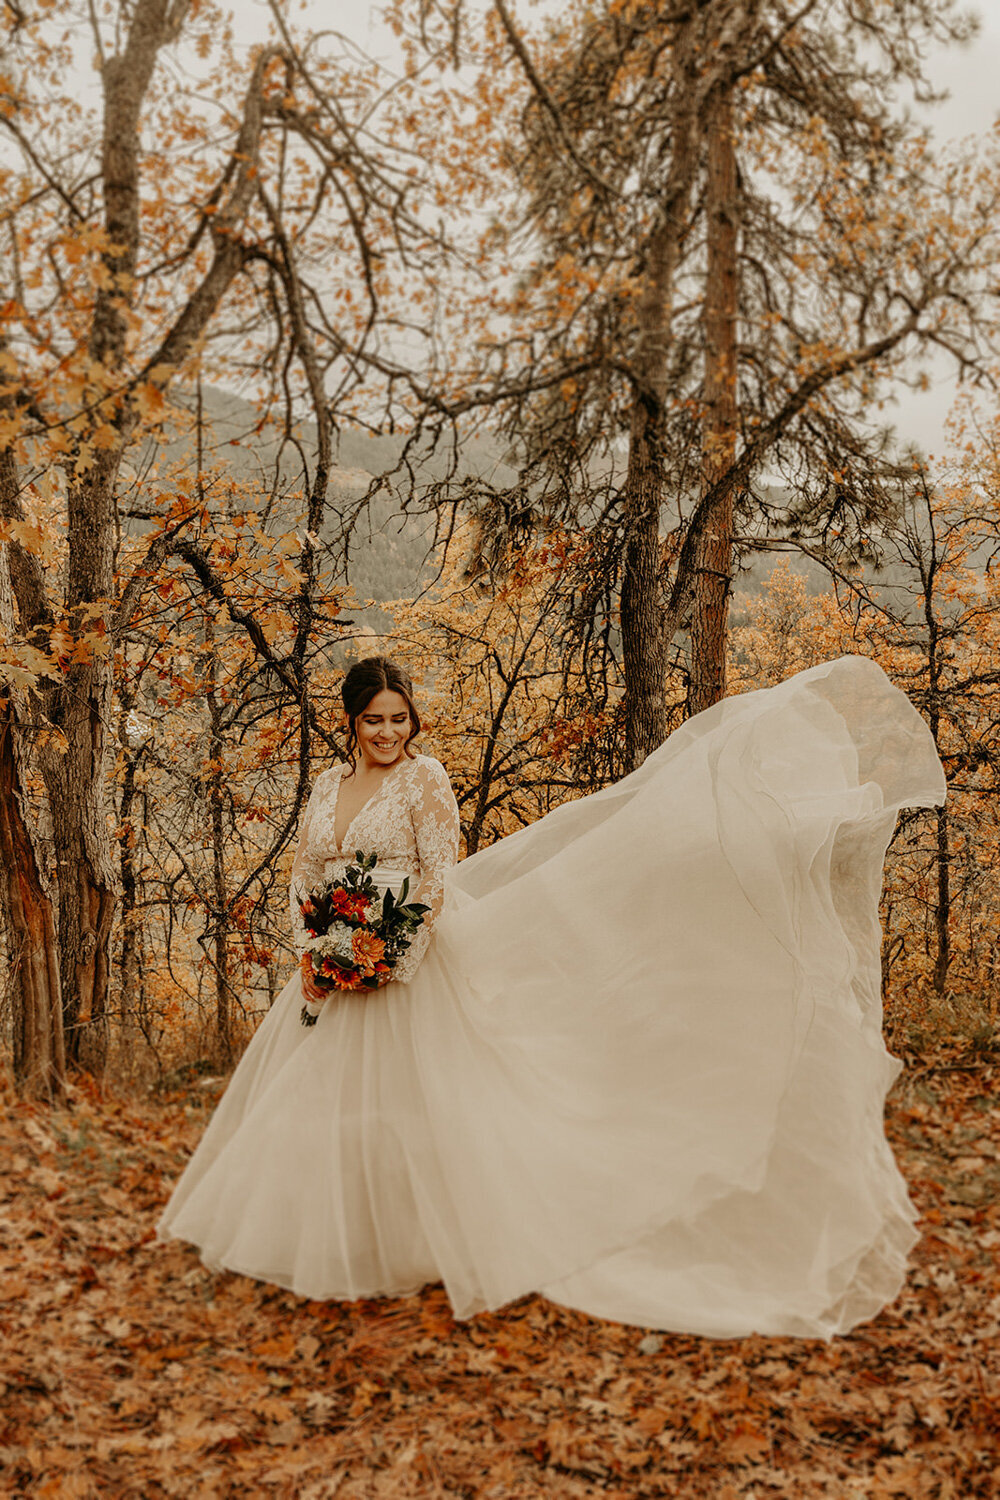 Bride wearing her wedding gown and holding her bouquet surrounded by trees